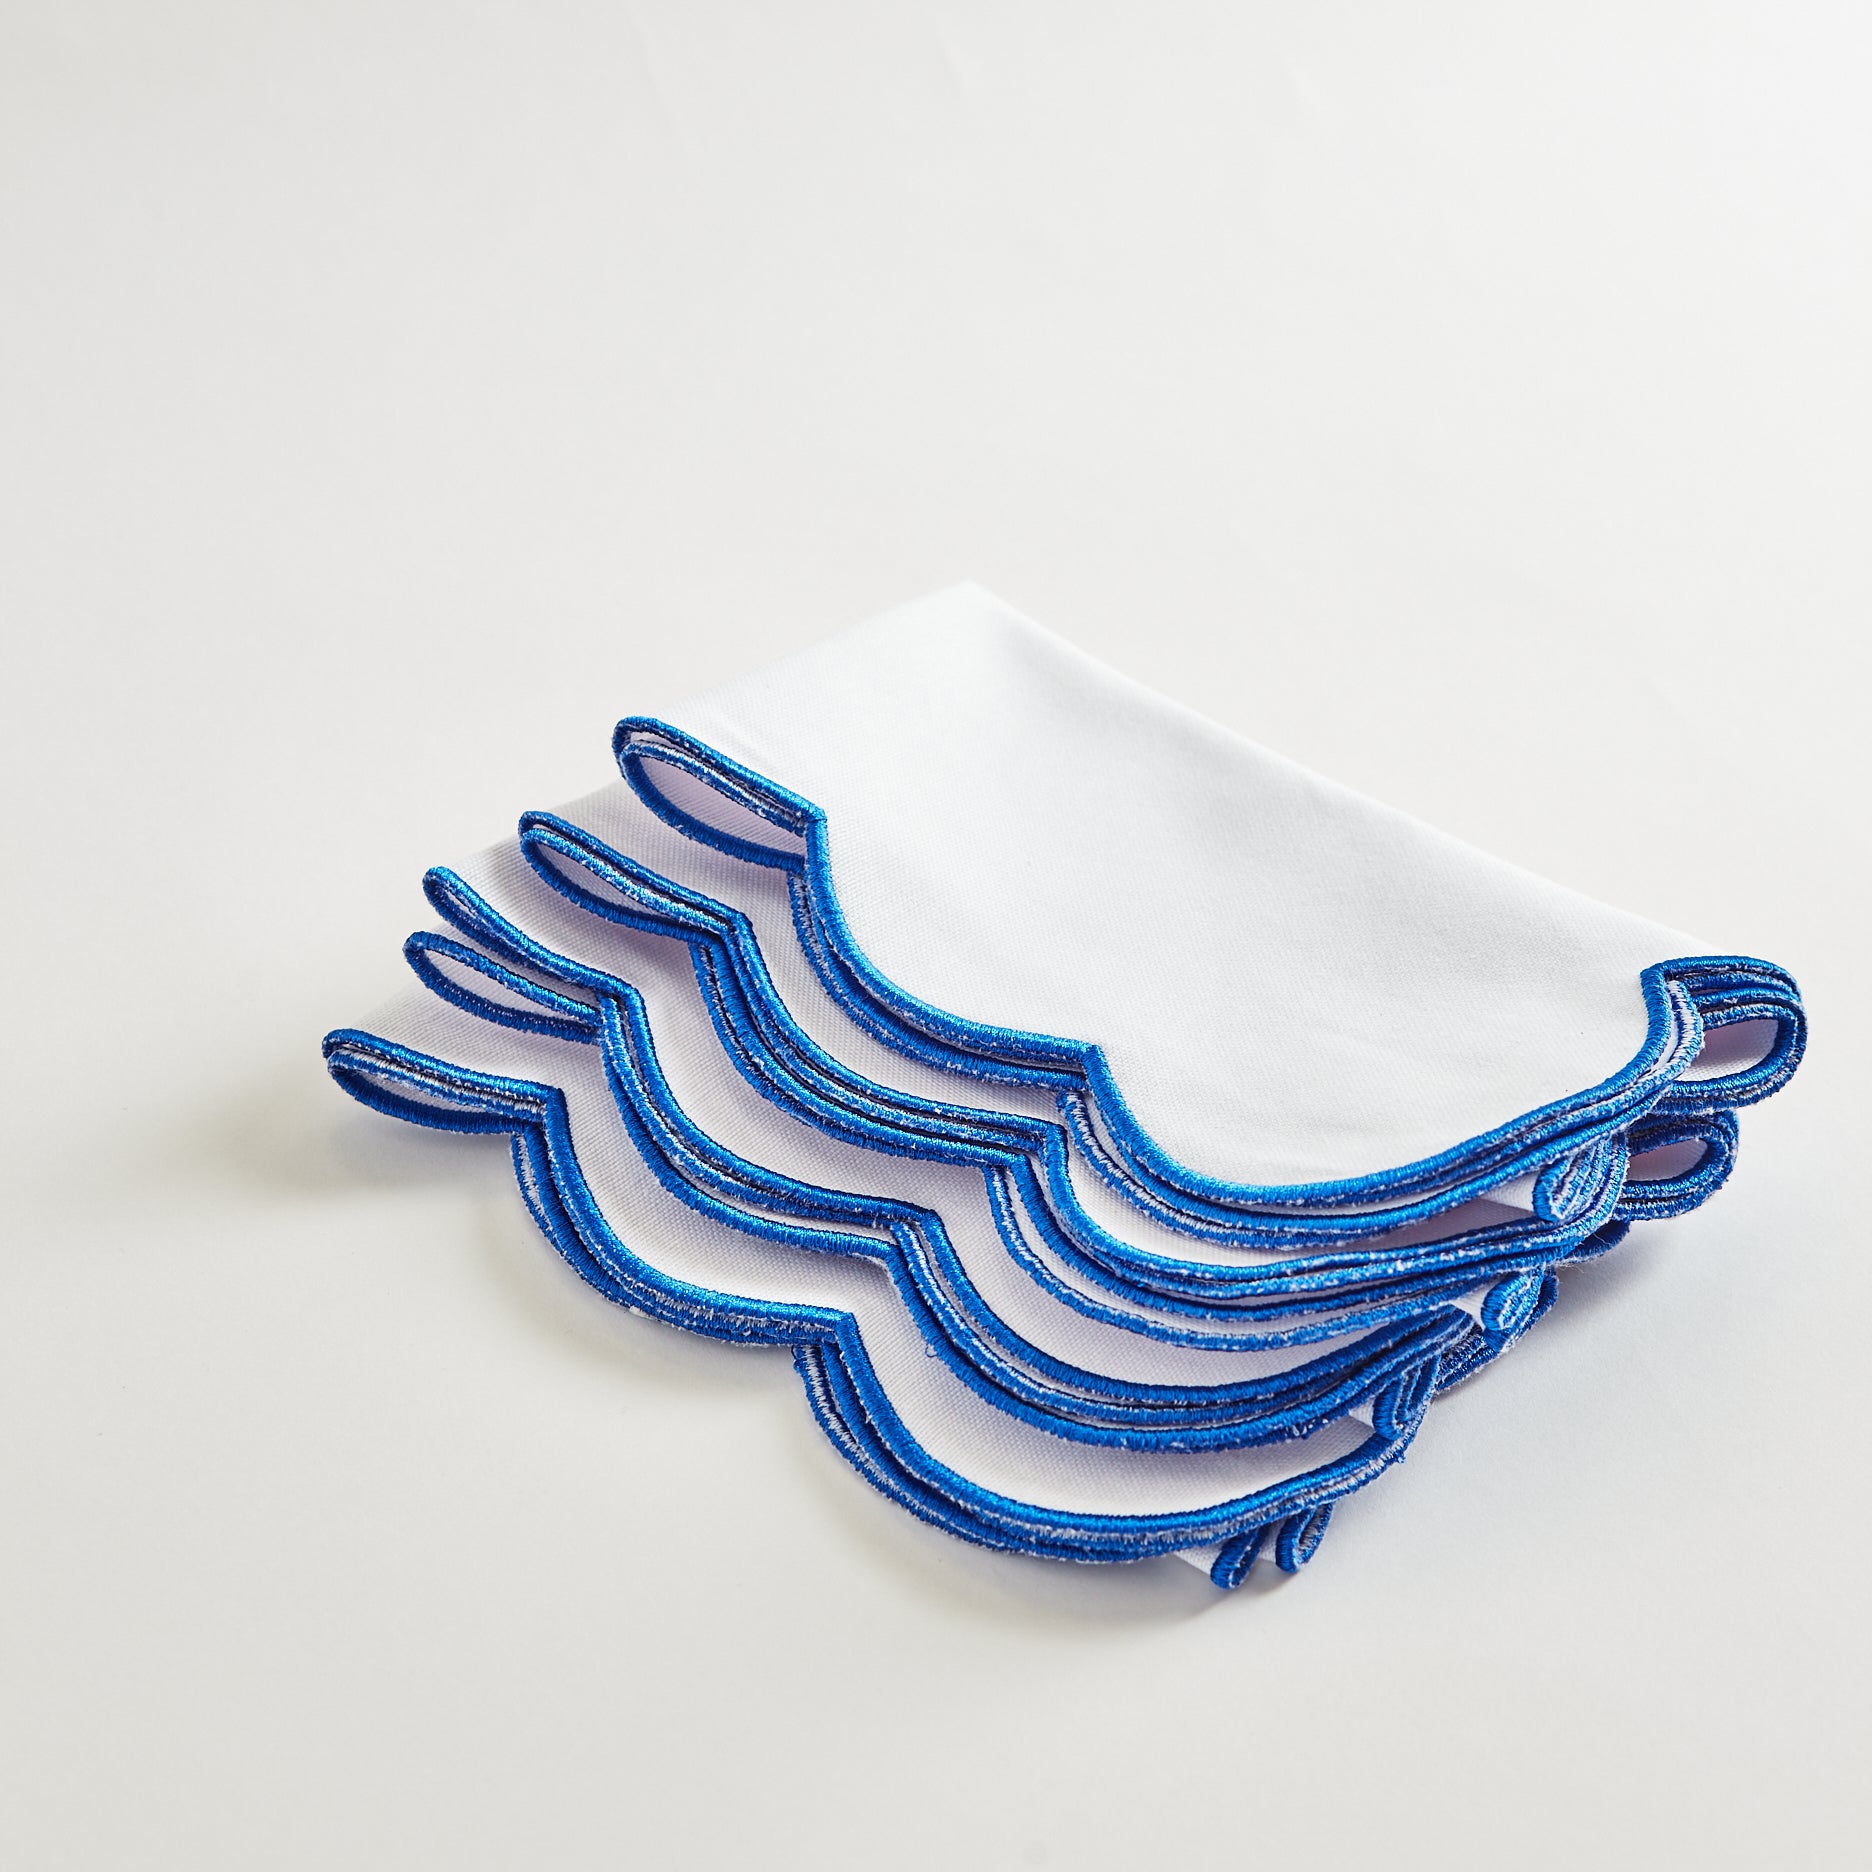 Embroidered Blue Scallop Napkin - Set of 4